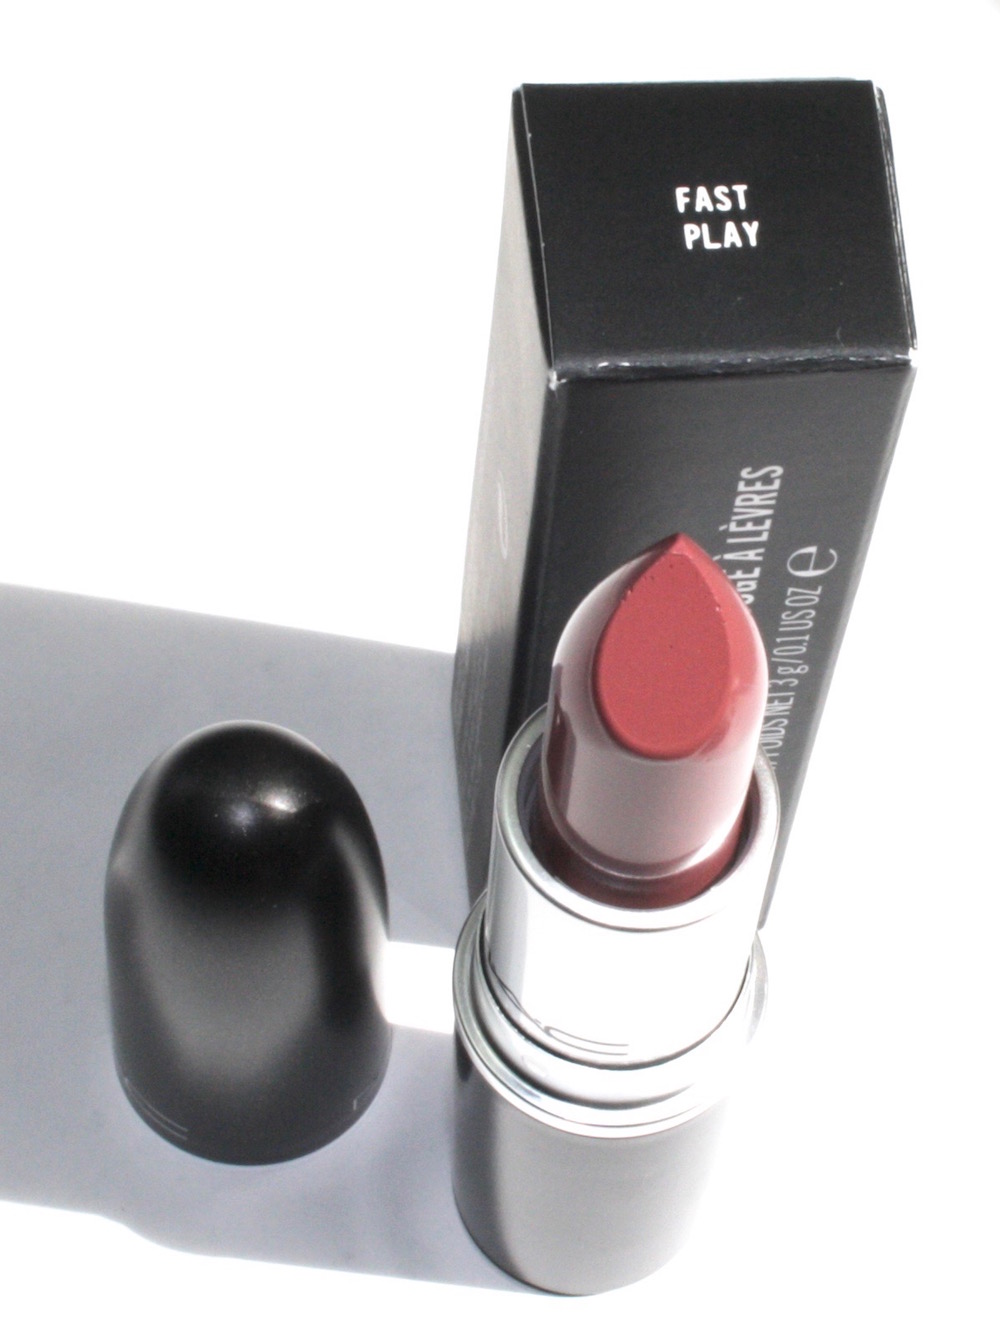 MAC Fast Play Lipstick Review and Swatches